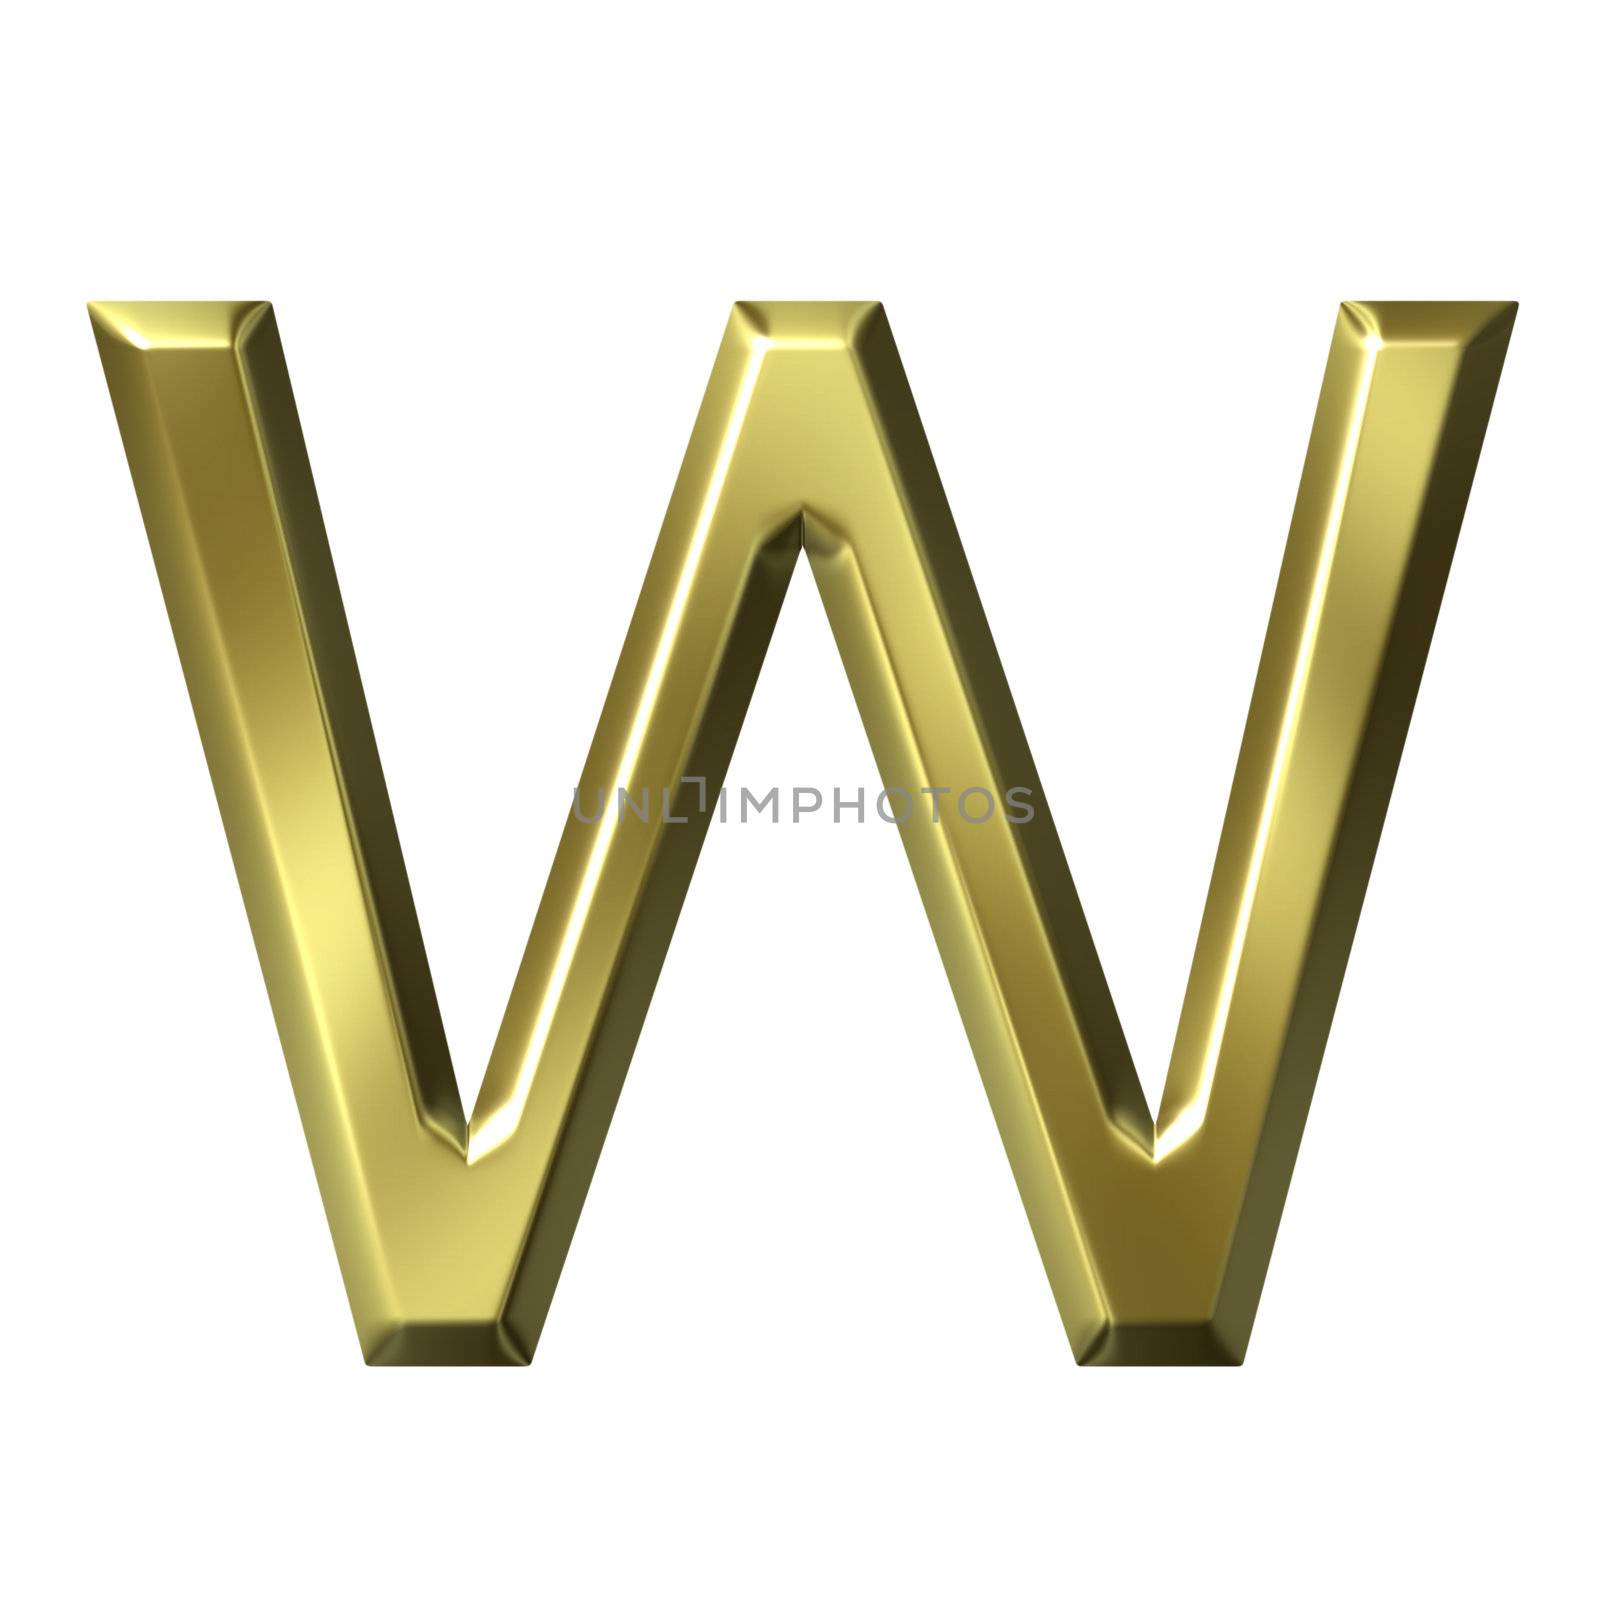 3d golden letter w isolated in white